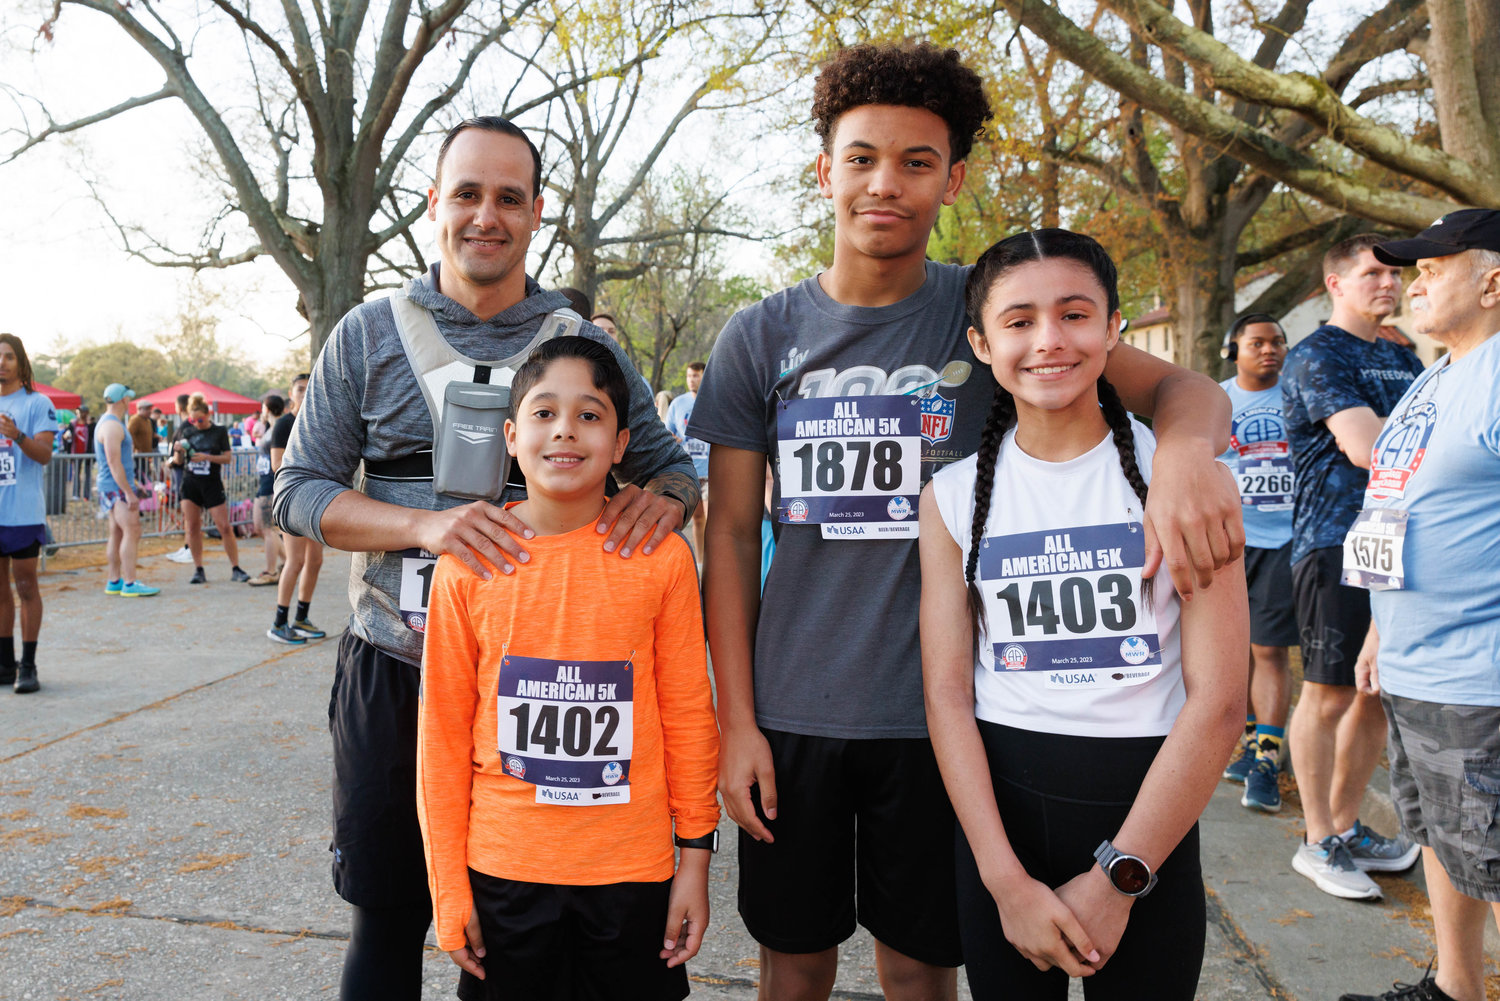 David Carattini, David Caratini Jr, Andy Reyes, and Isabella Caratini stand at the starting line of the 5K All American Race on Fort Bragg on March 25, 2023.  Tony Wooten/CityView Media